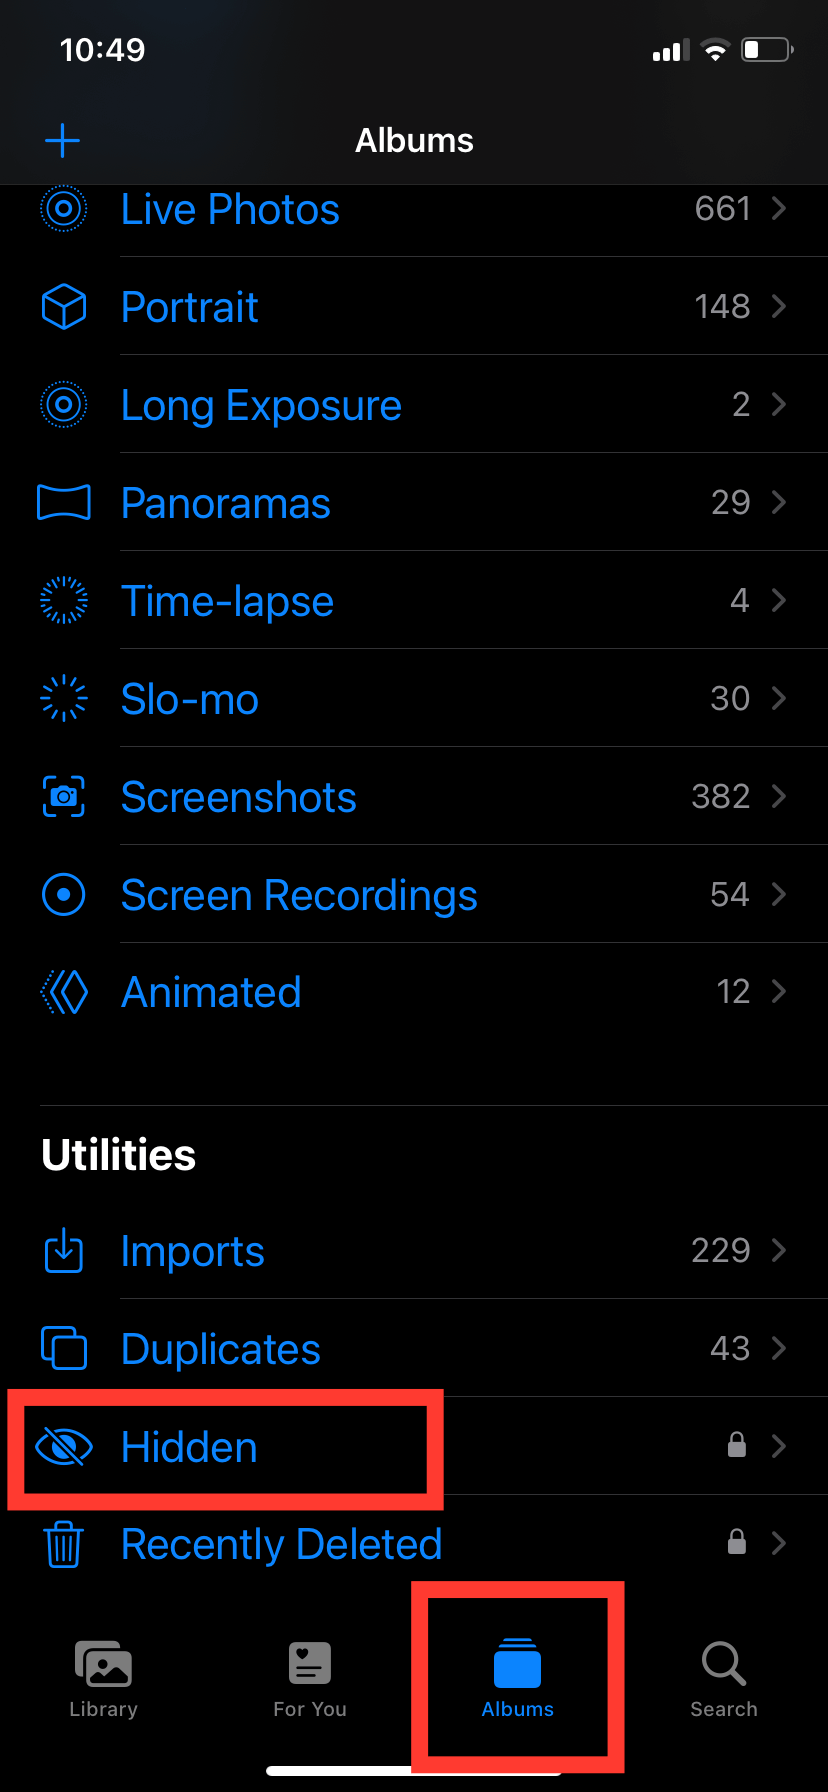 The iOS 16 Photos Albums menu. At the bottom, underneath the Utilities sub-menu, we have highlighted the Hidden folder option with a red box